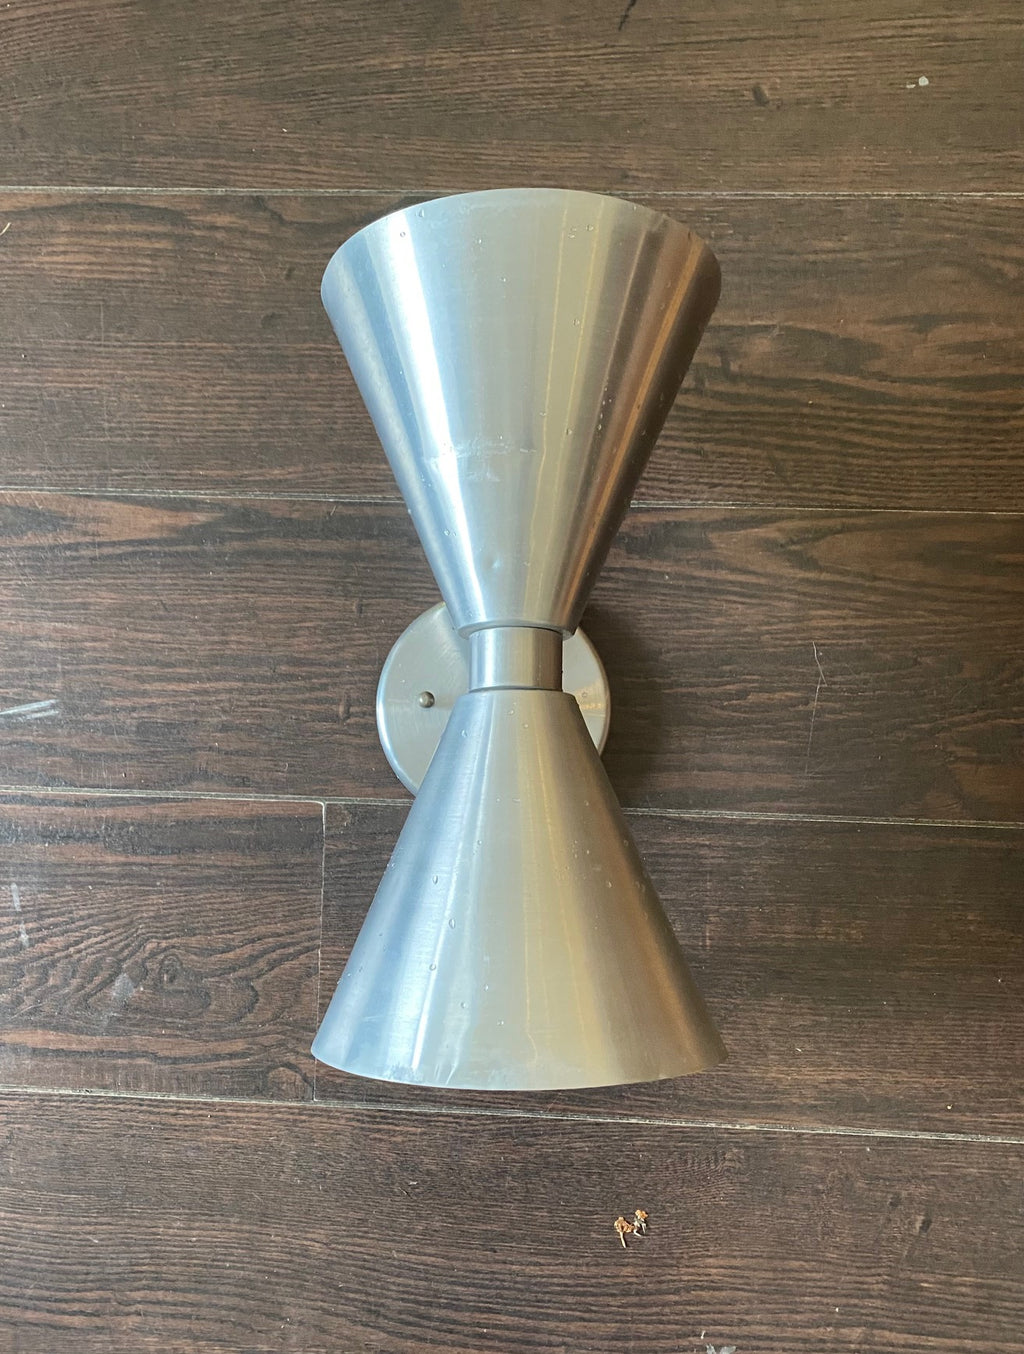 Known as the "hourglass", "bow tie" and "double cone", this authentic vintage wall sconce creates the perfect finish for your Mid-century inspired space- Cook Street Vintage